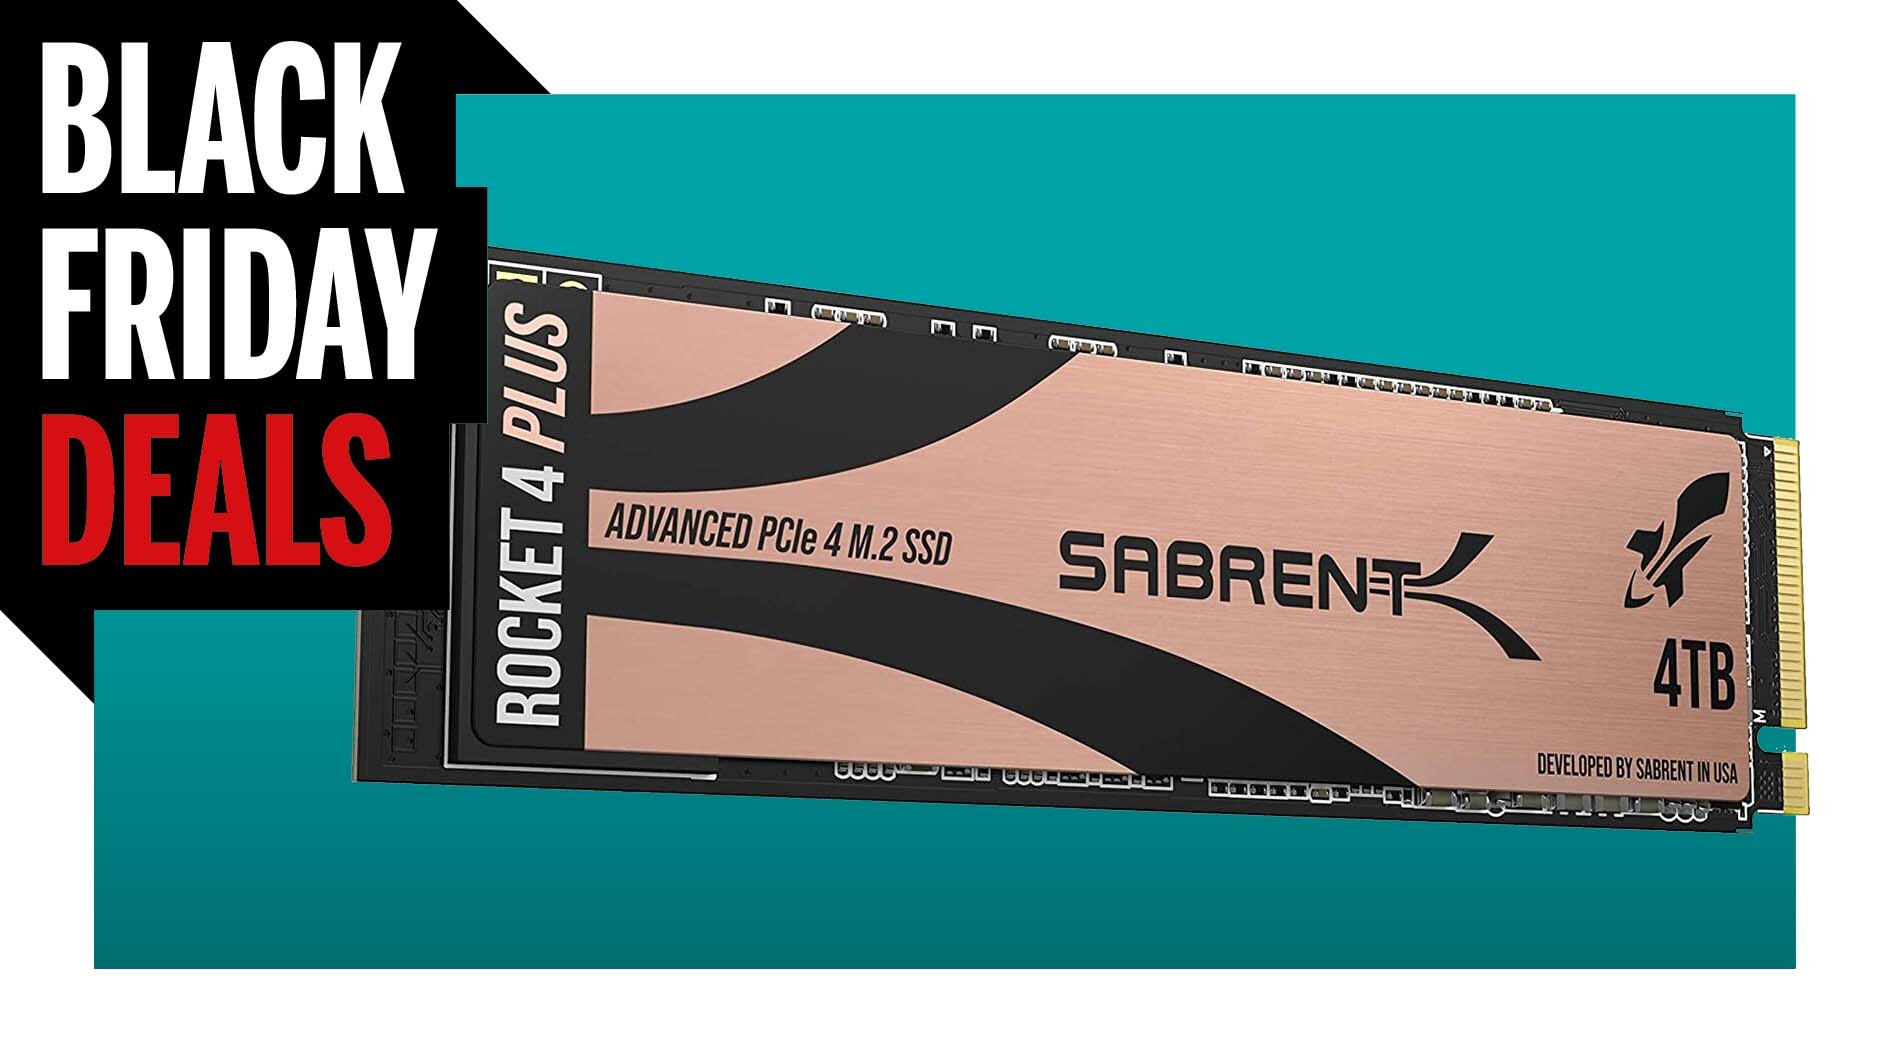  A massive 4TB NVMe SSD is definitely overkill, but for $250 off I'll consider it 